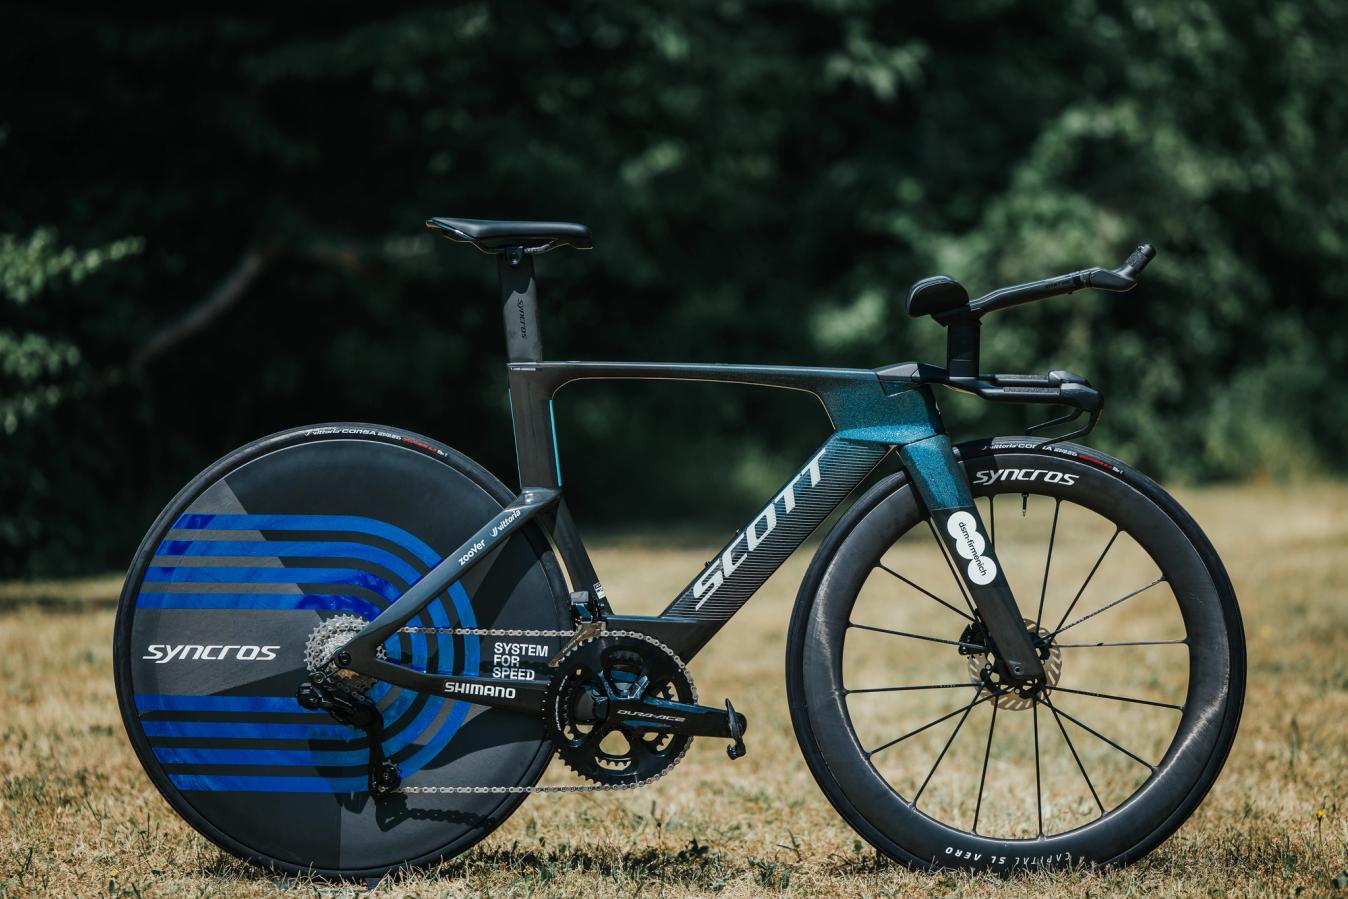 dsm-firmenich will debut the wheels on stage 16 of the Tour de France.